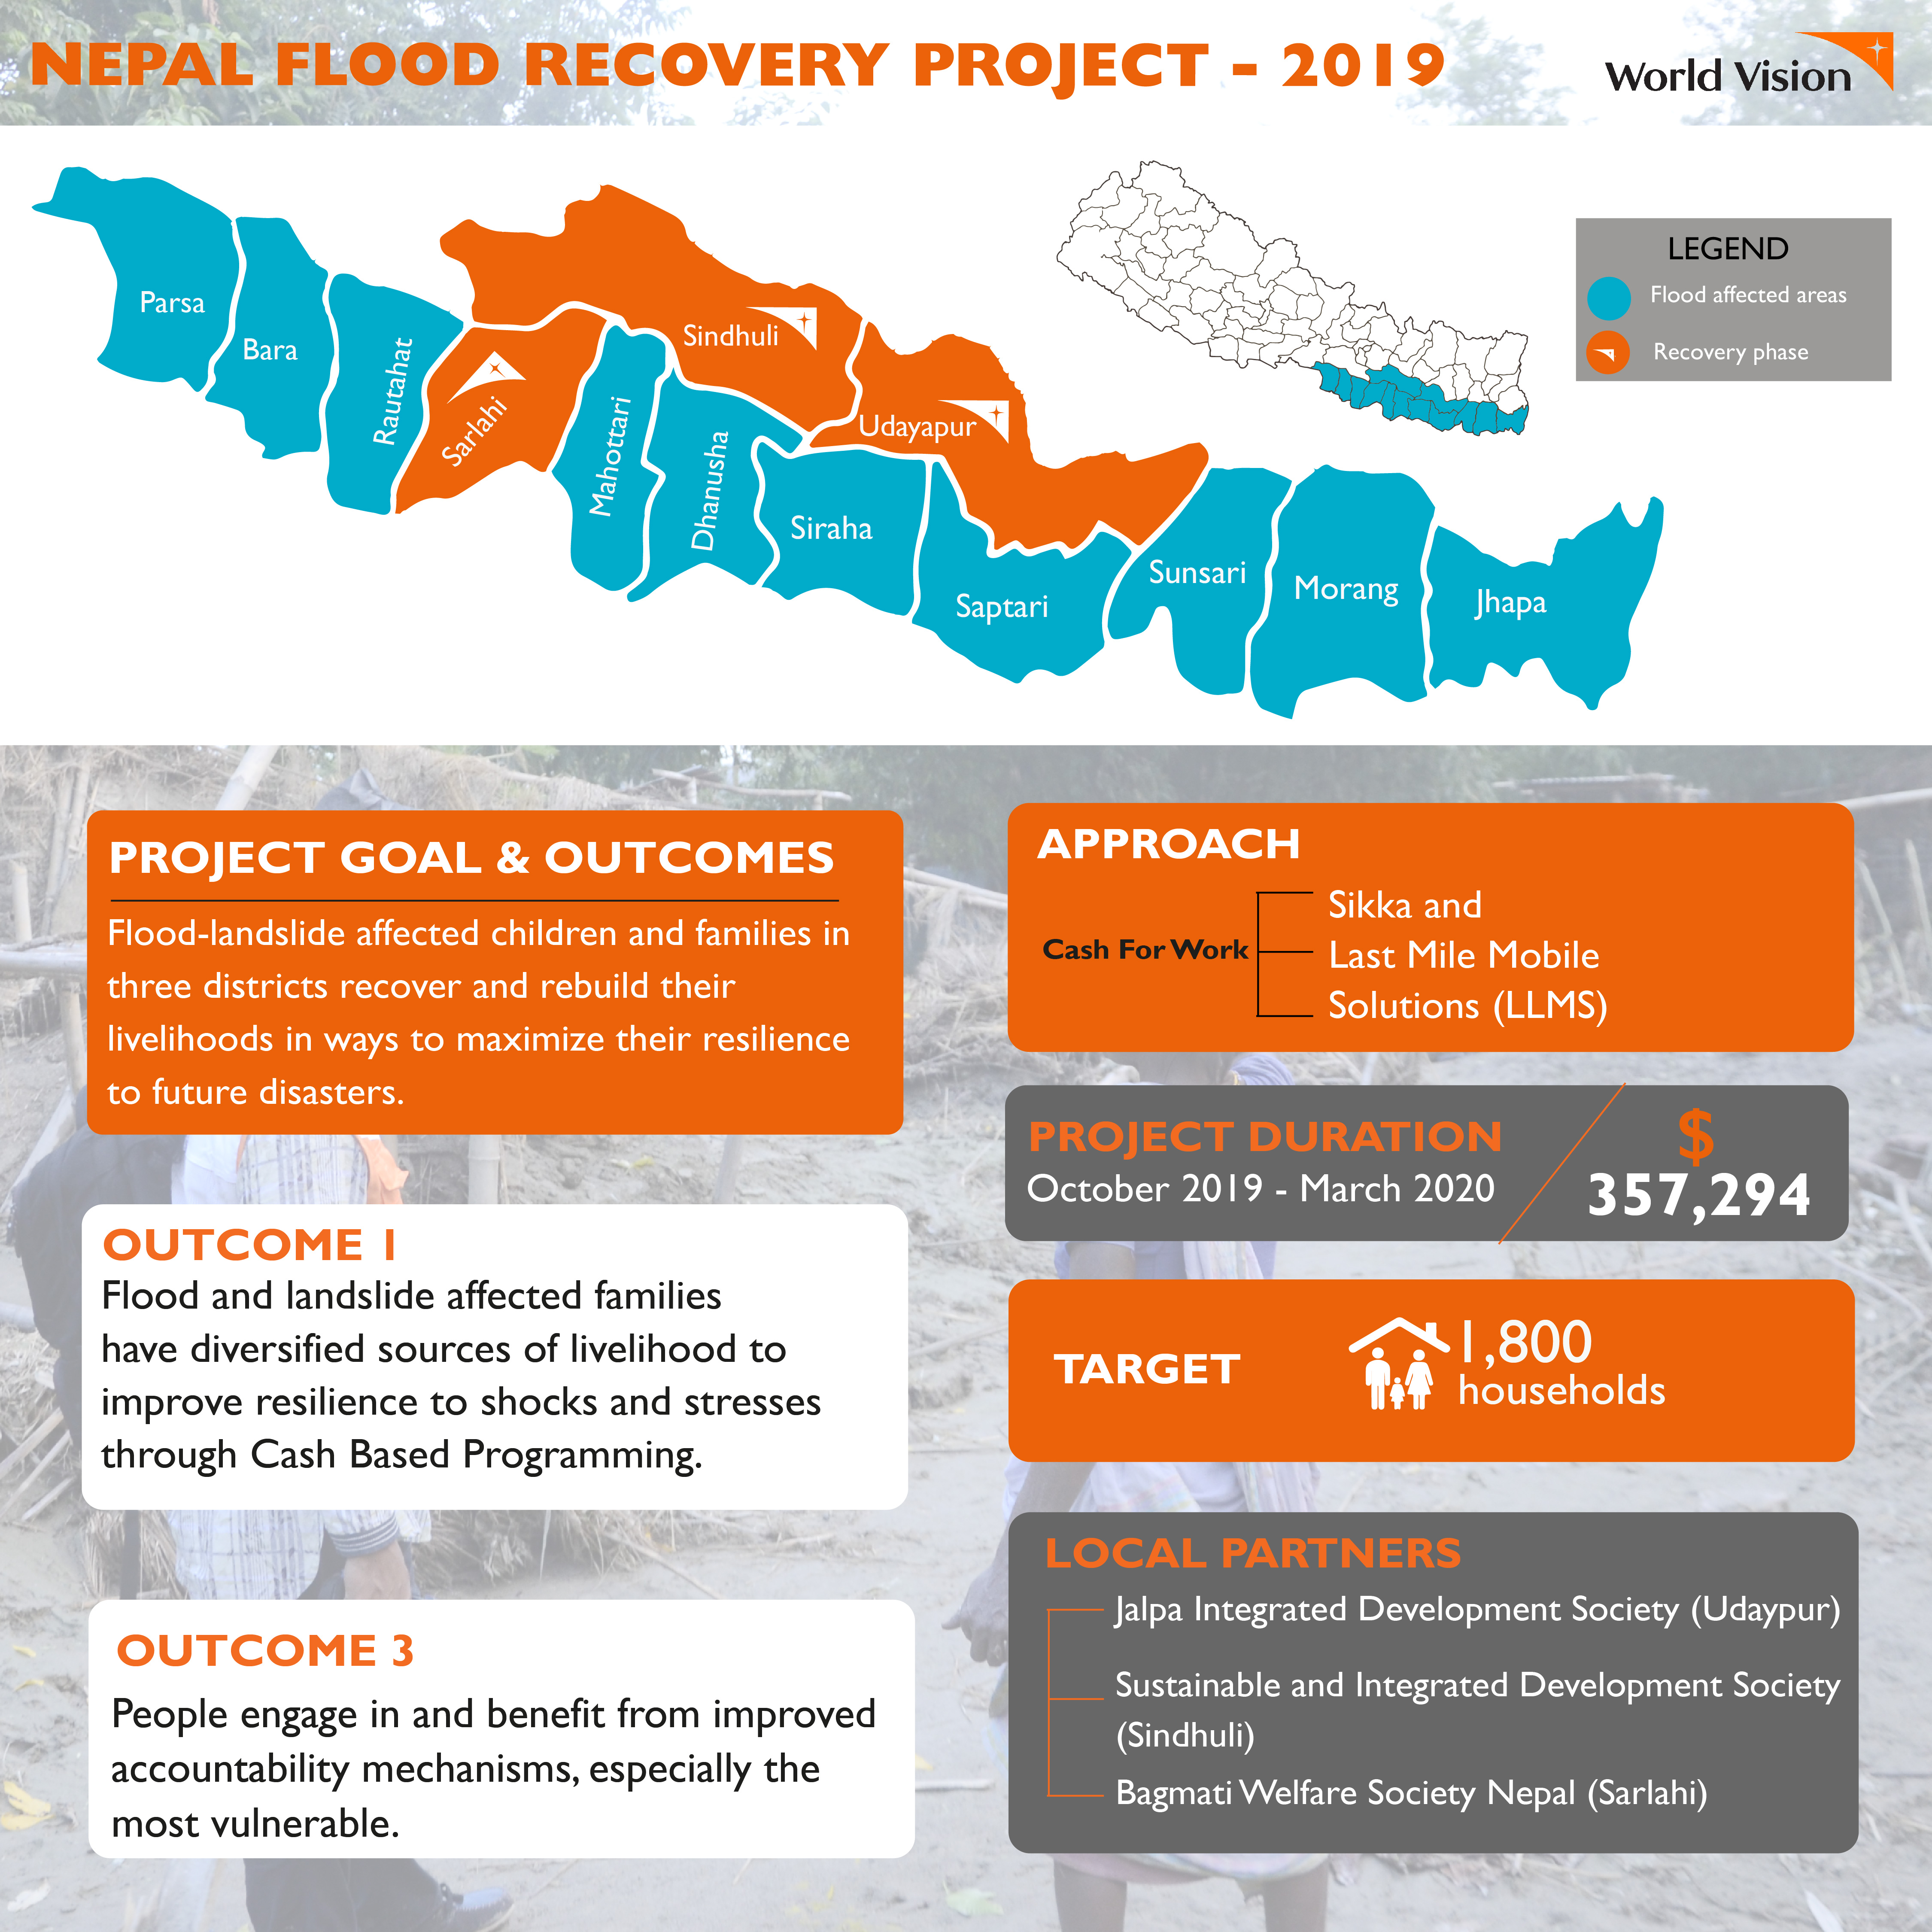 Nepal Flood Recovery Project 2019 infographic